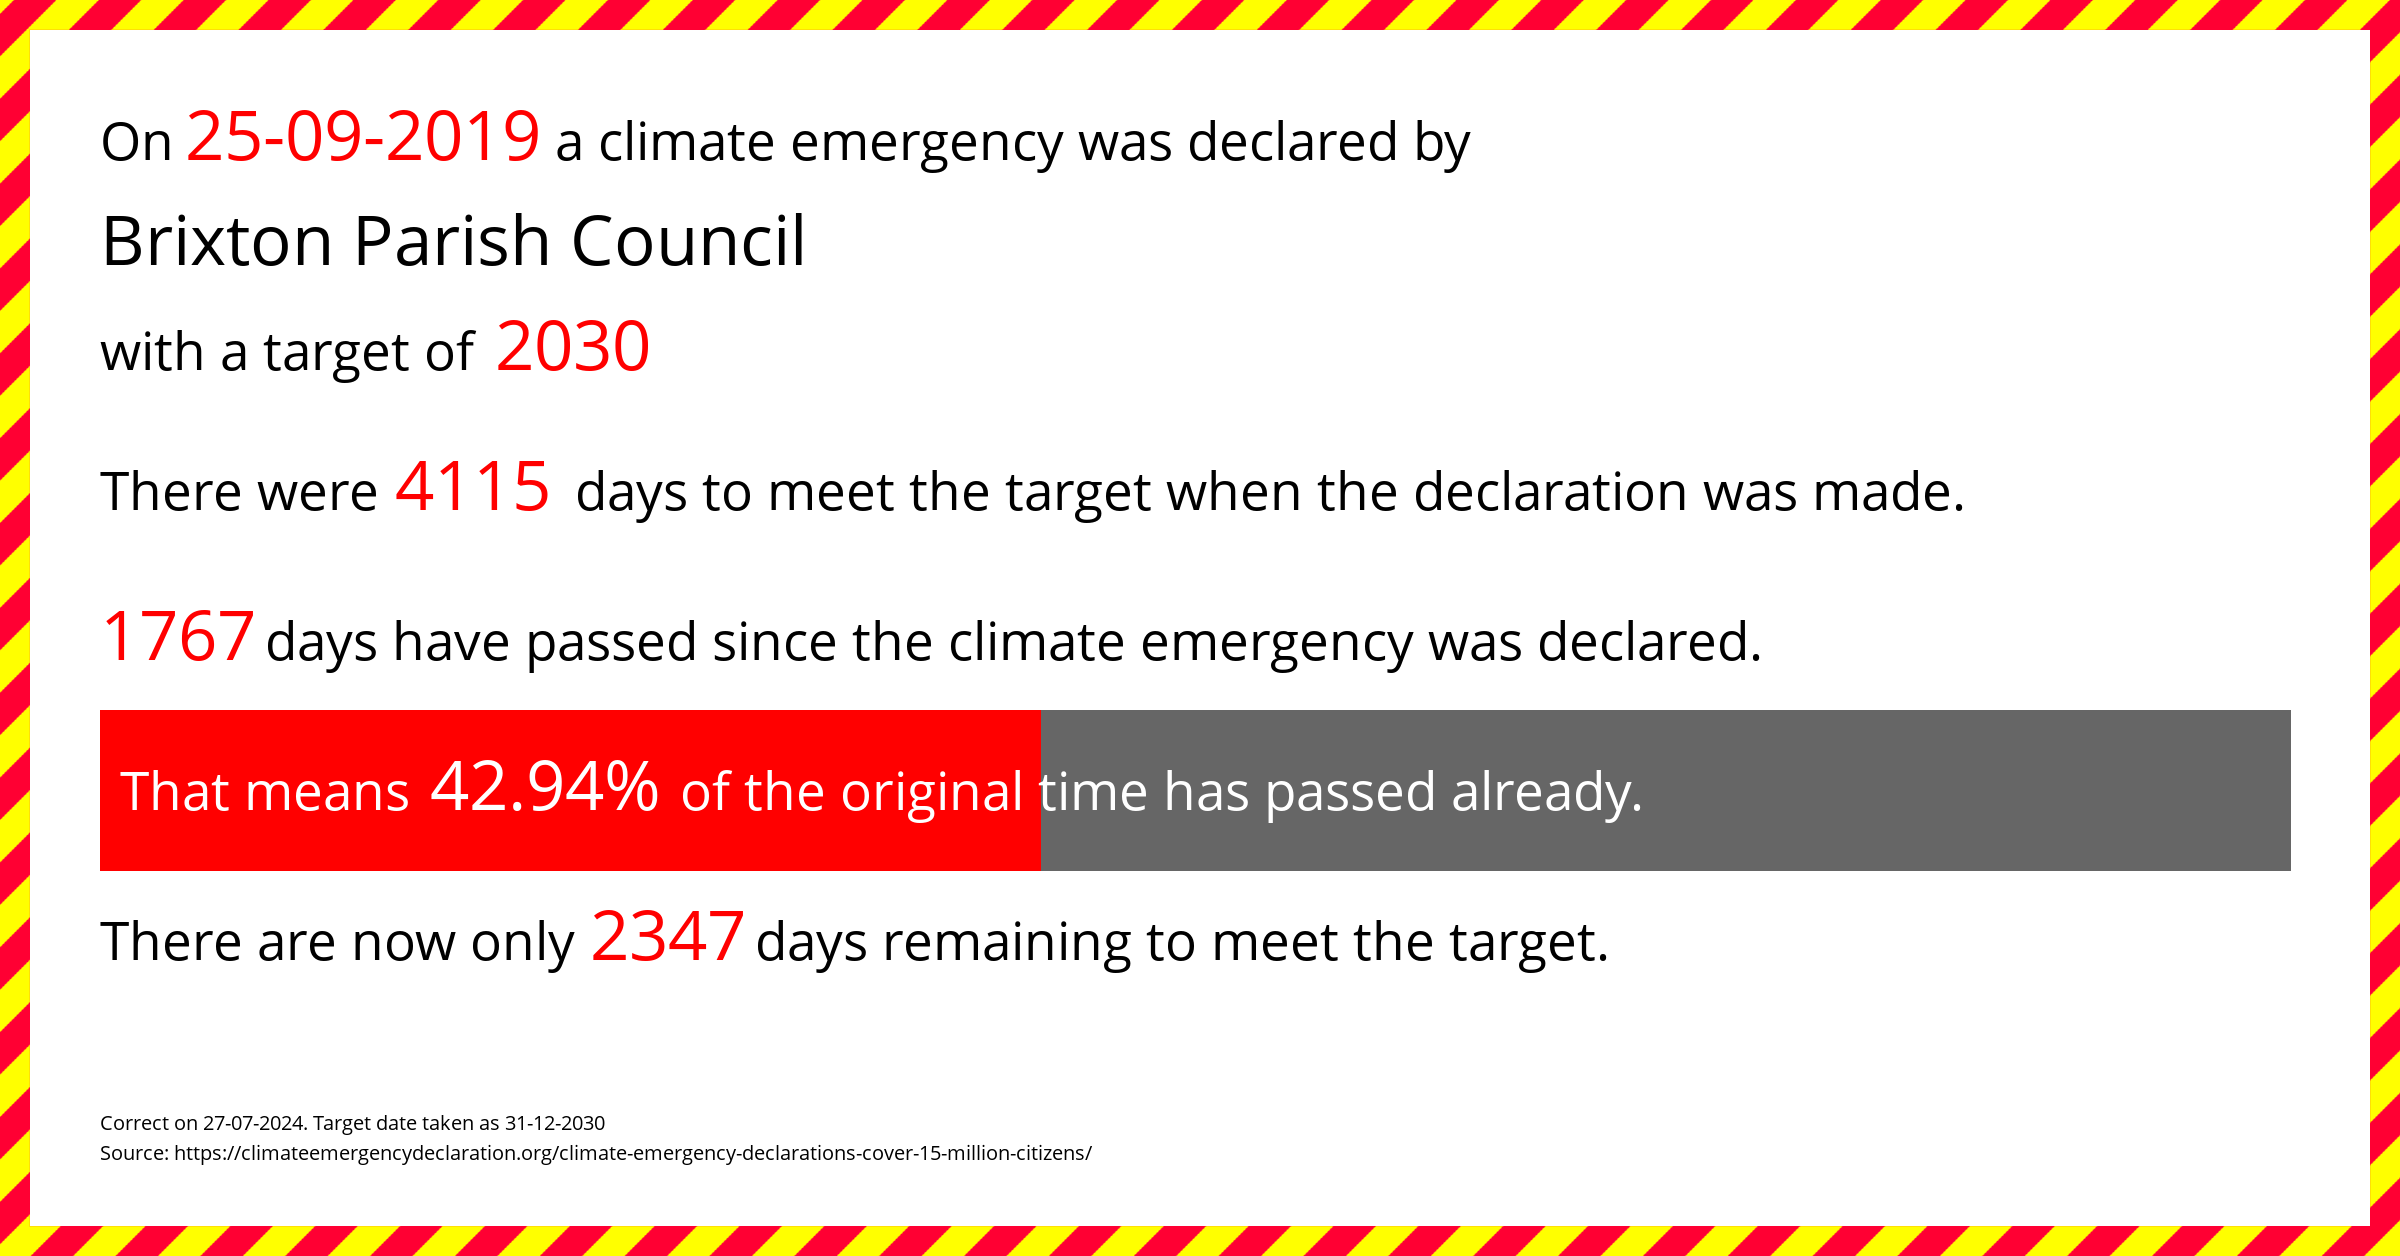 Brixton Parish Council declared a Climate emergency on Wednesday 25th September 2019, with a target of 2030.